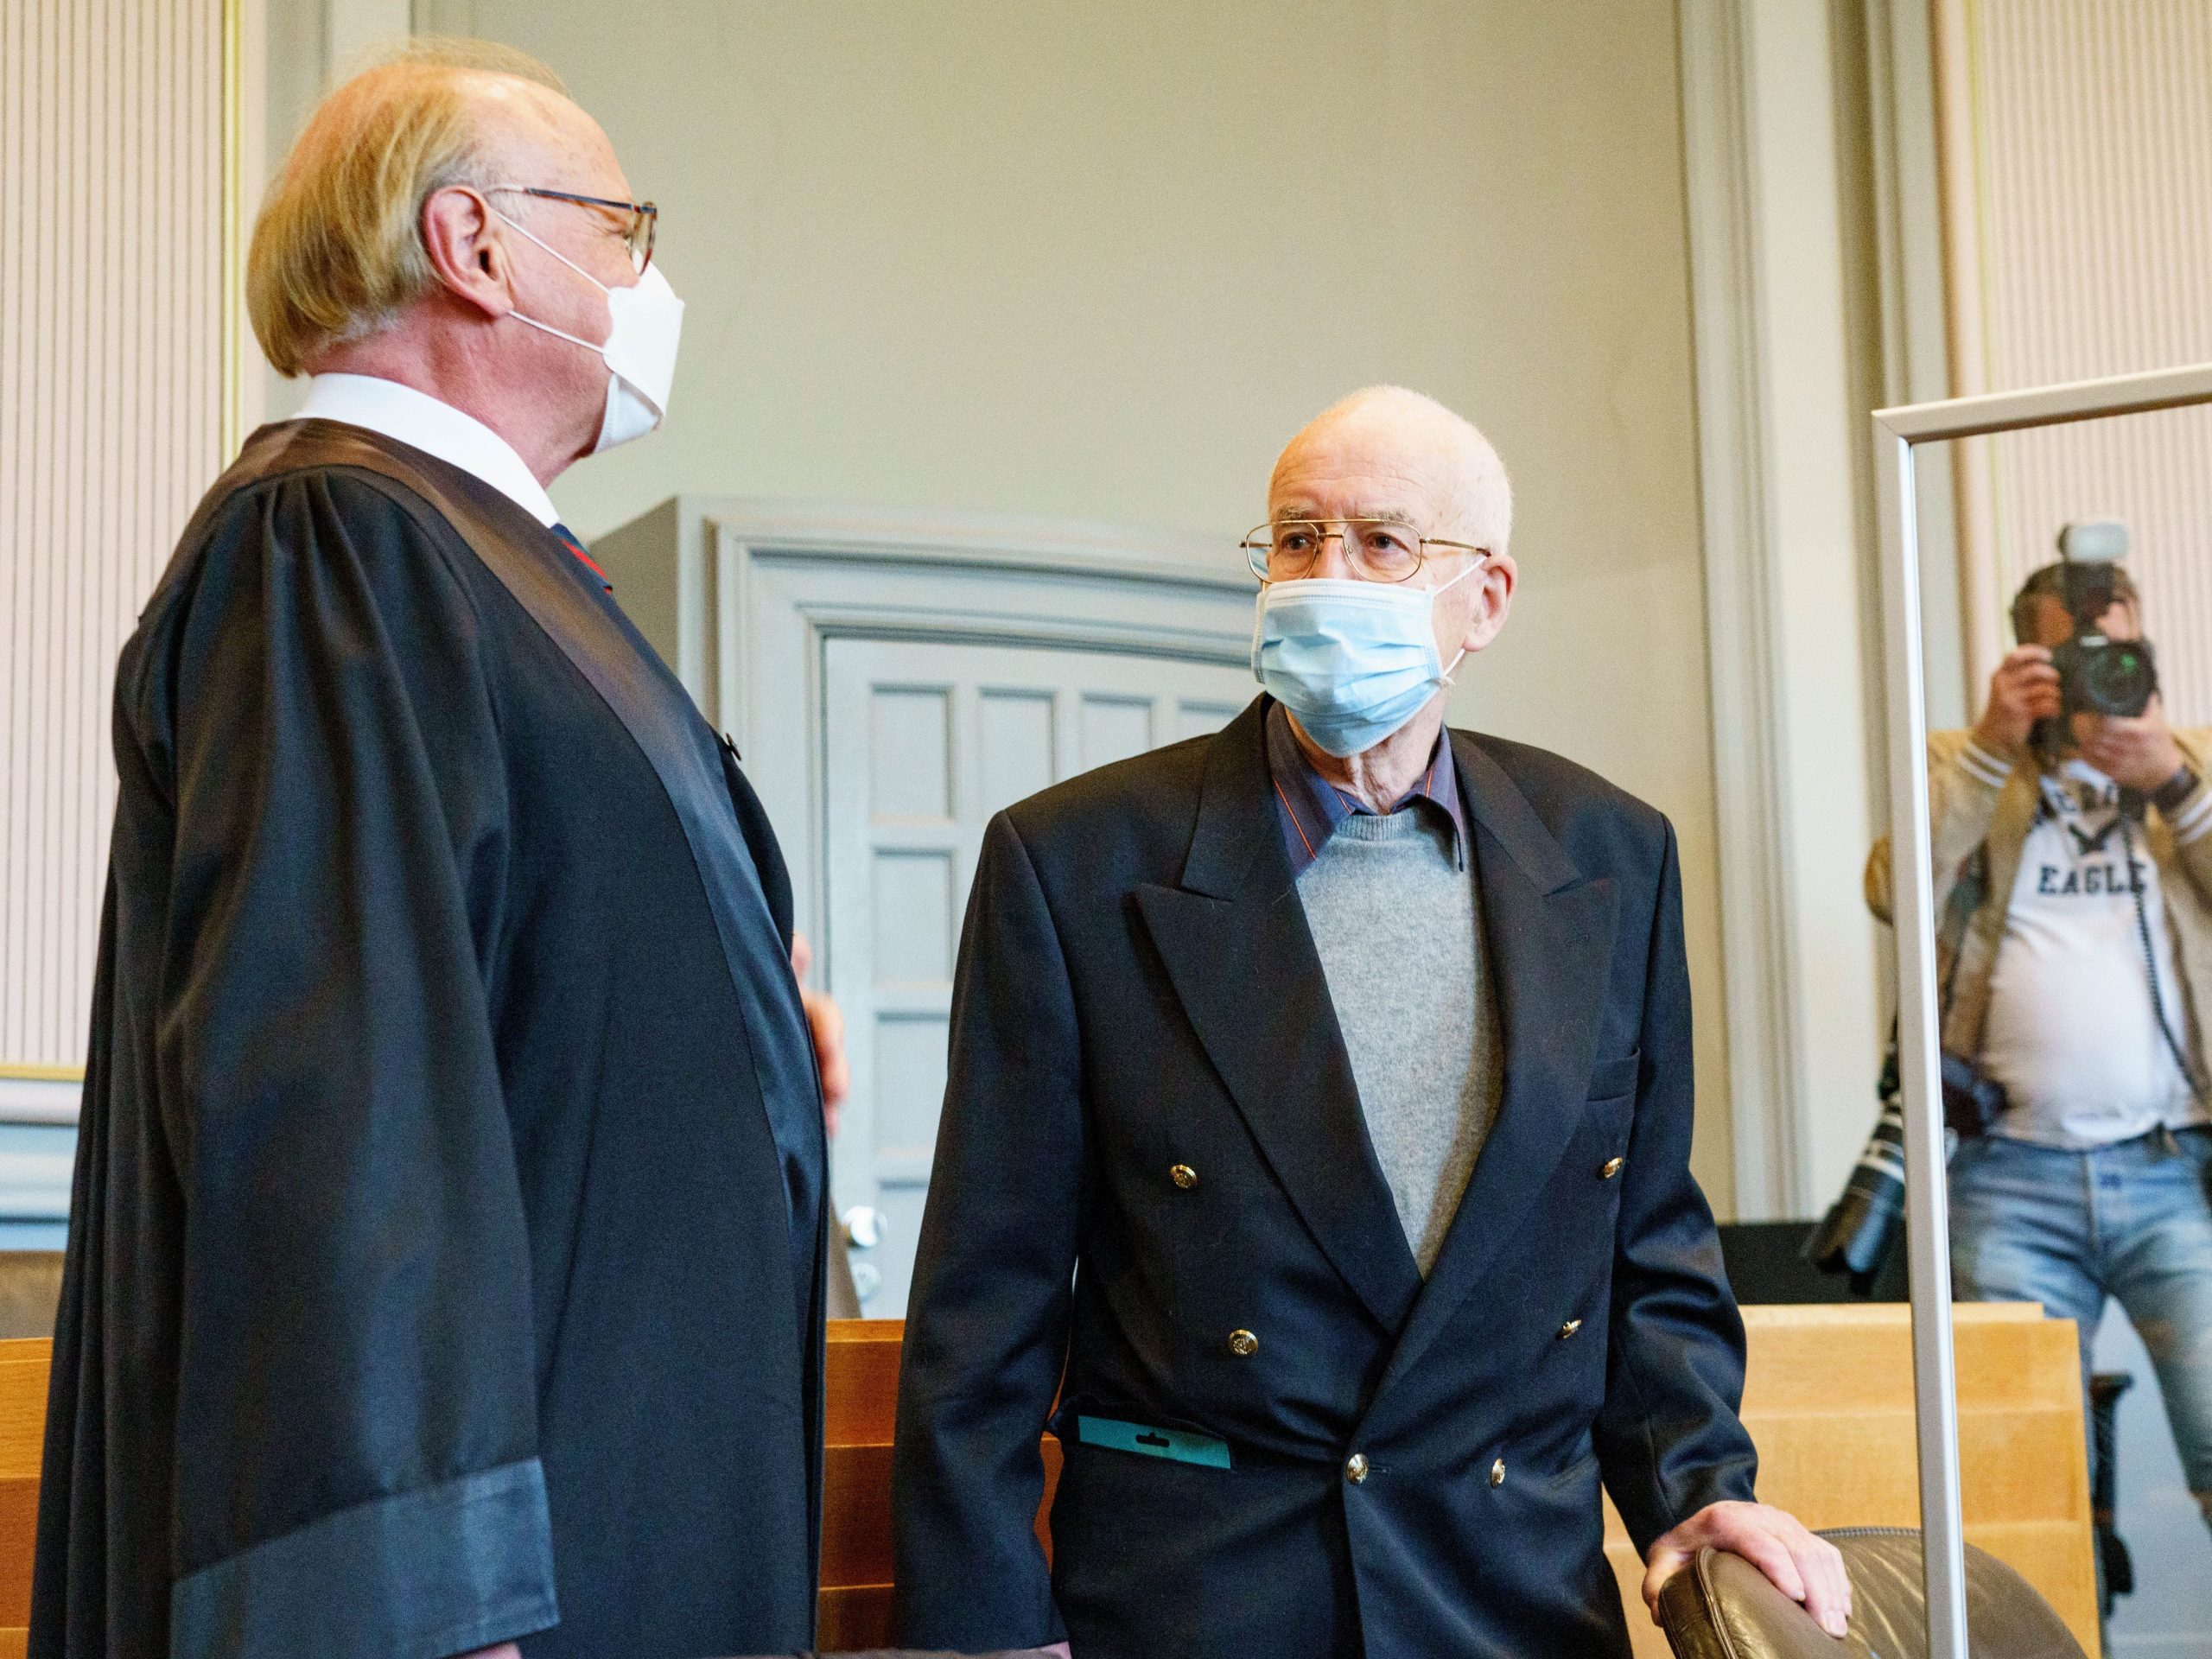 he 84-year-old accused of possession of a tank (M) and his lawyer Gerald Goecke (l), wait in the courtroom for the start of the trial.